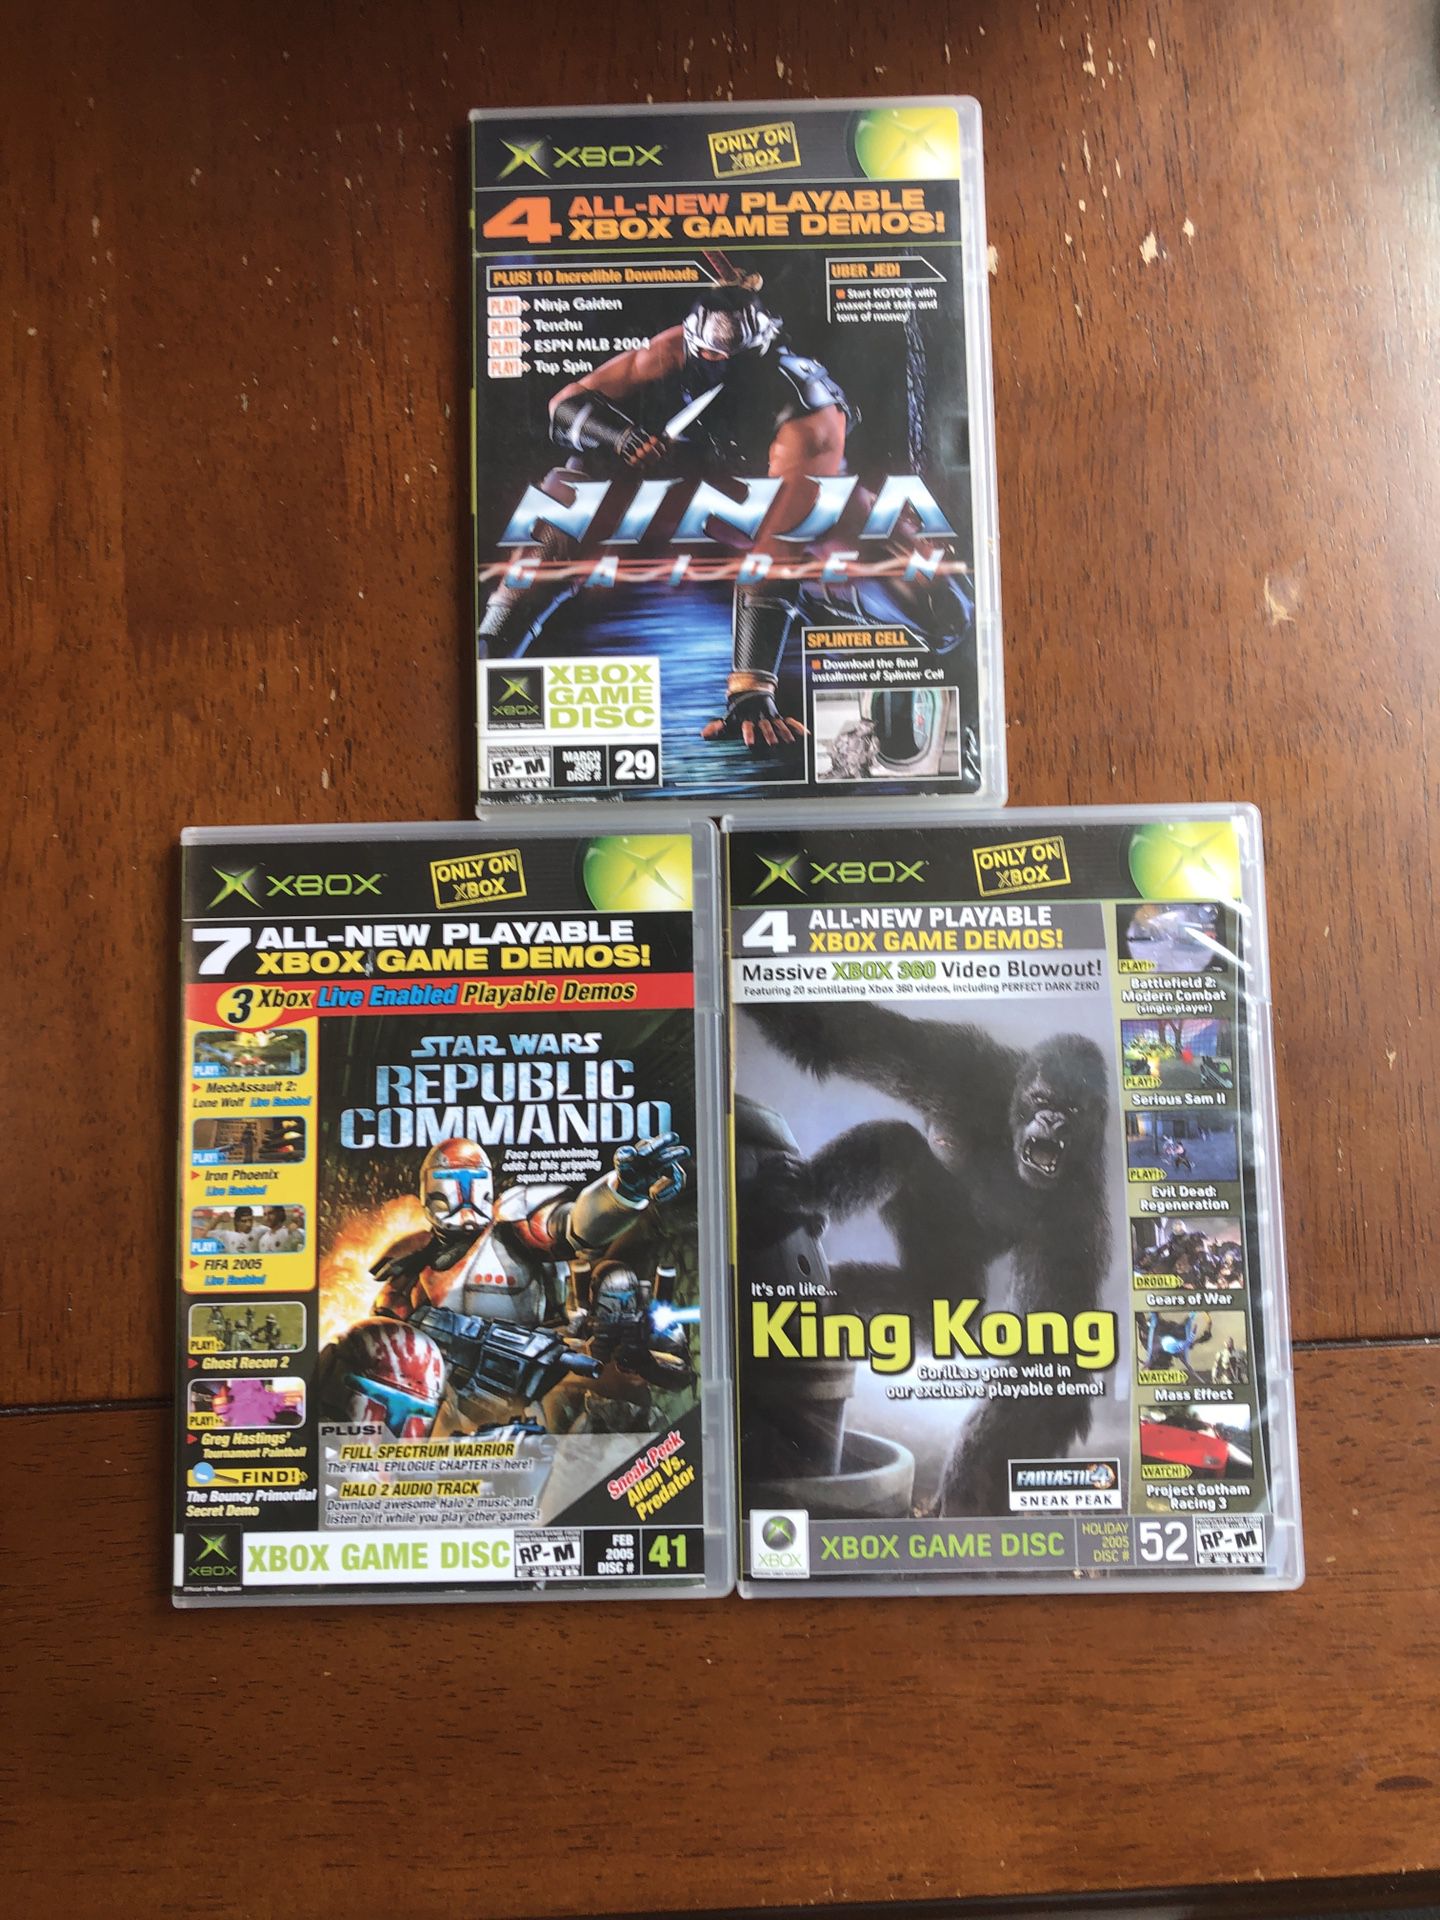 Official Xbox Magazine Demo Disc Tall Case Lot Of 3. OXM 29, 41 & 52